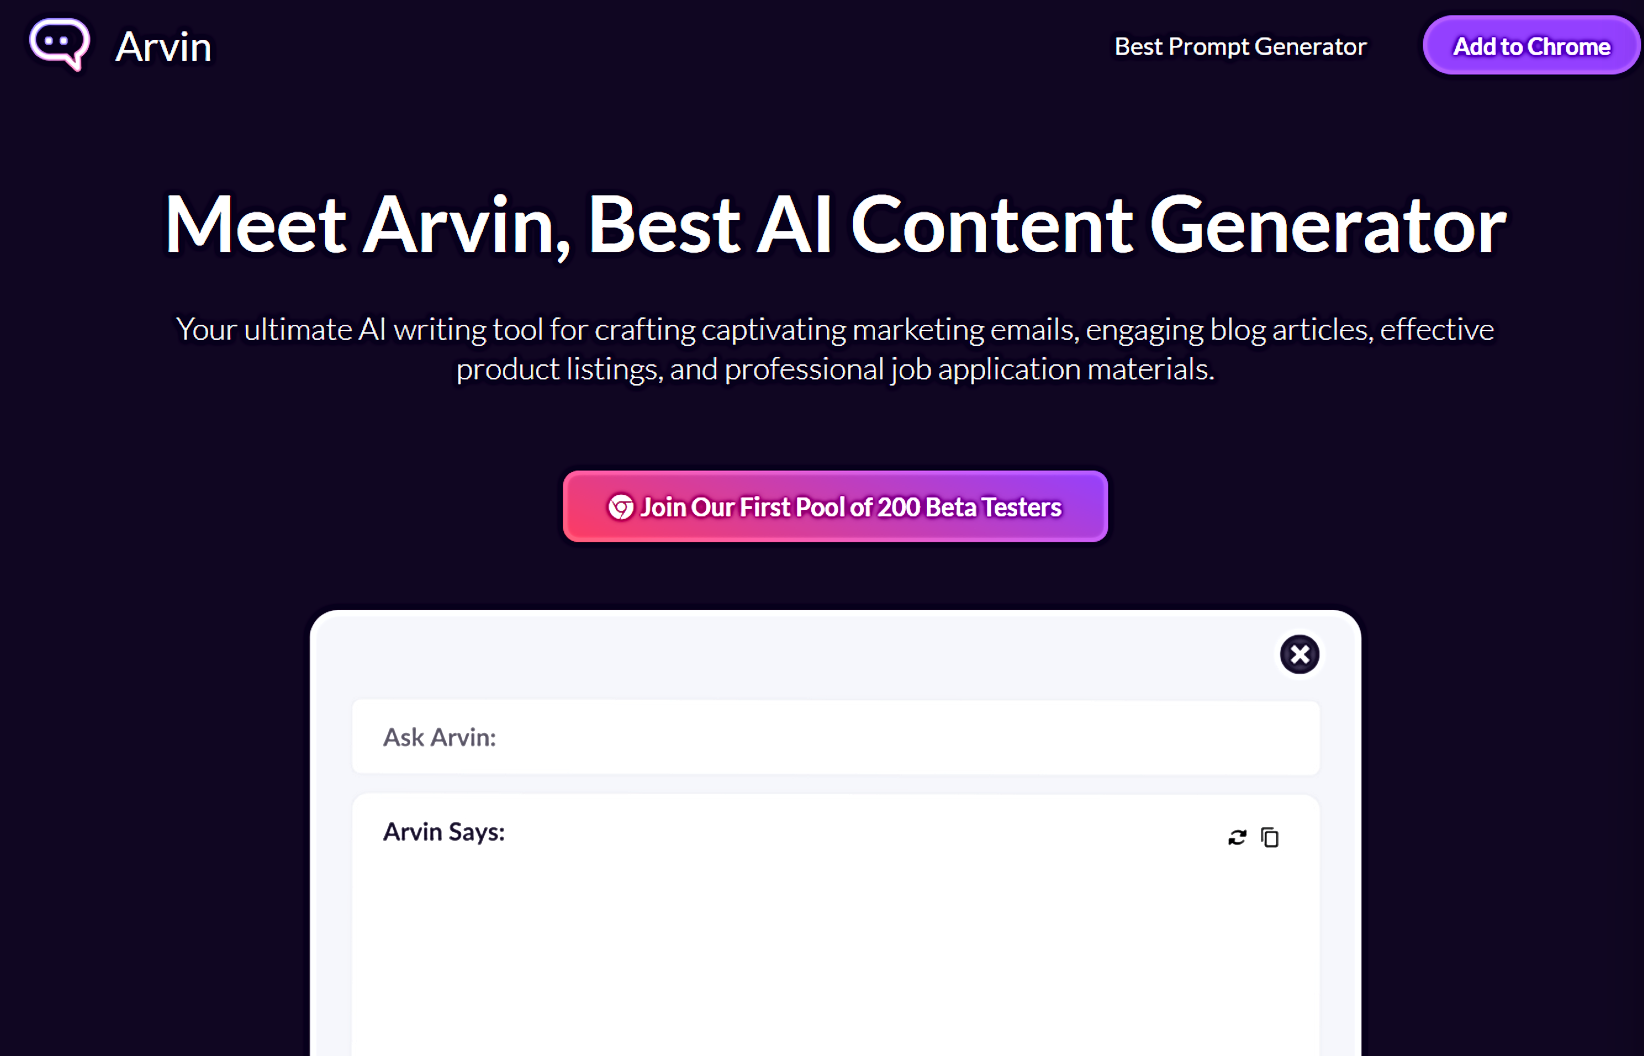 Arvin featured